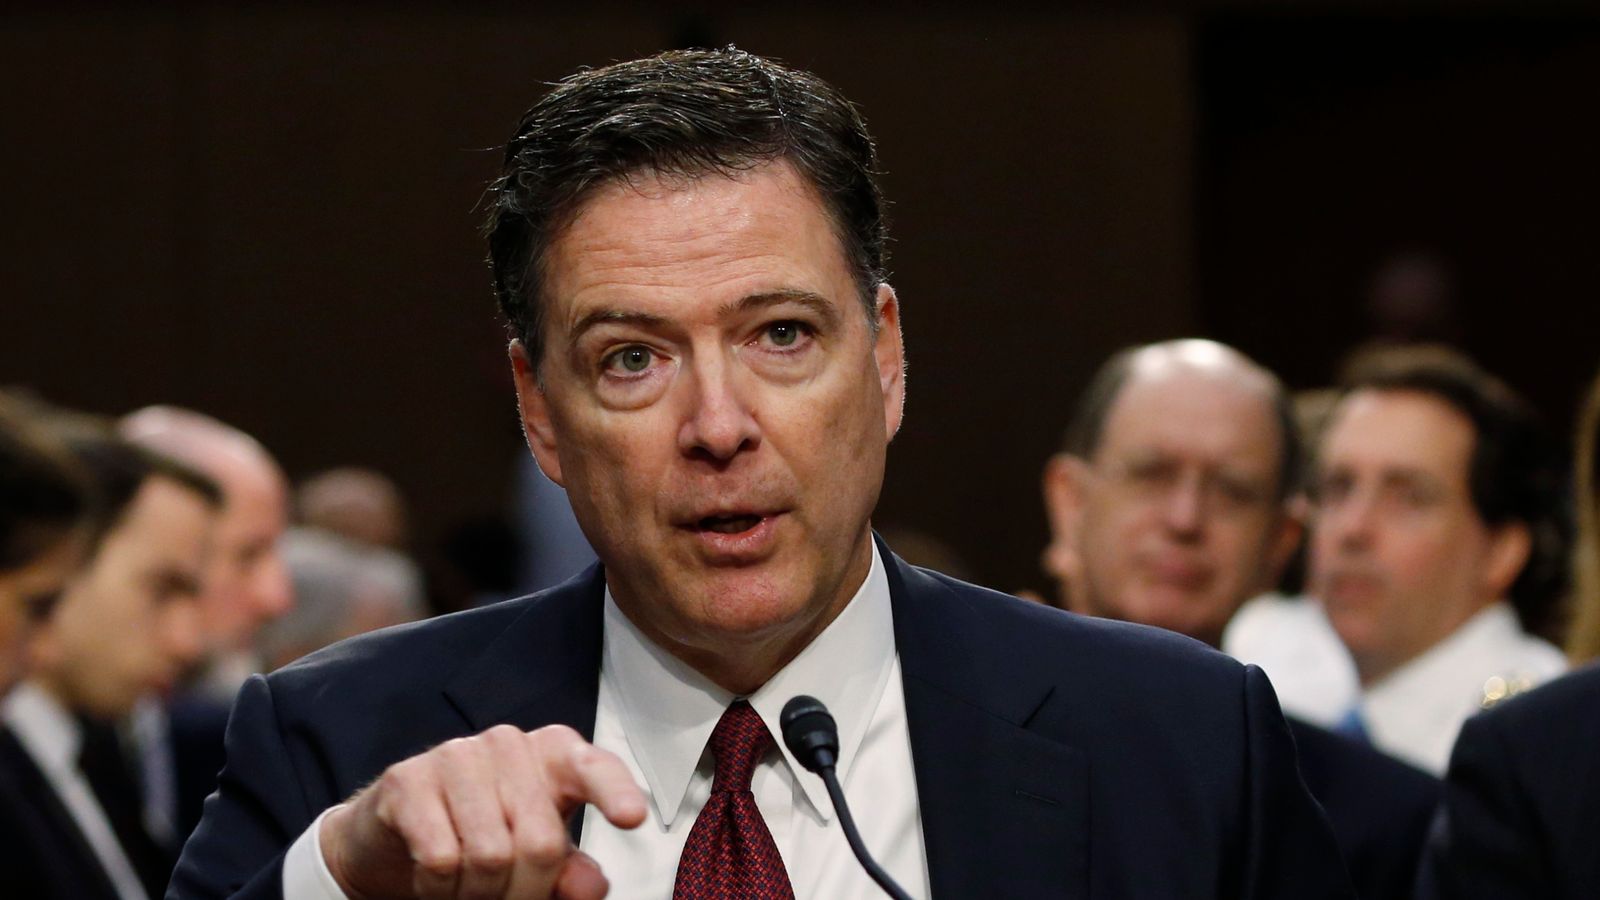 James Comey and FBI criticised by watchdog over Hillary Clinton emails | US News | Sky News